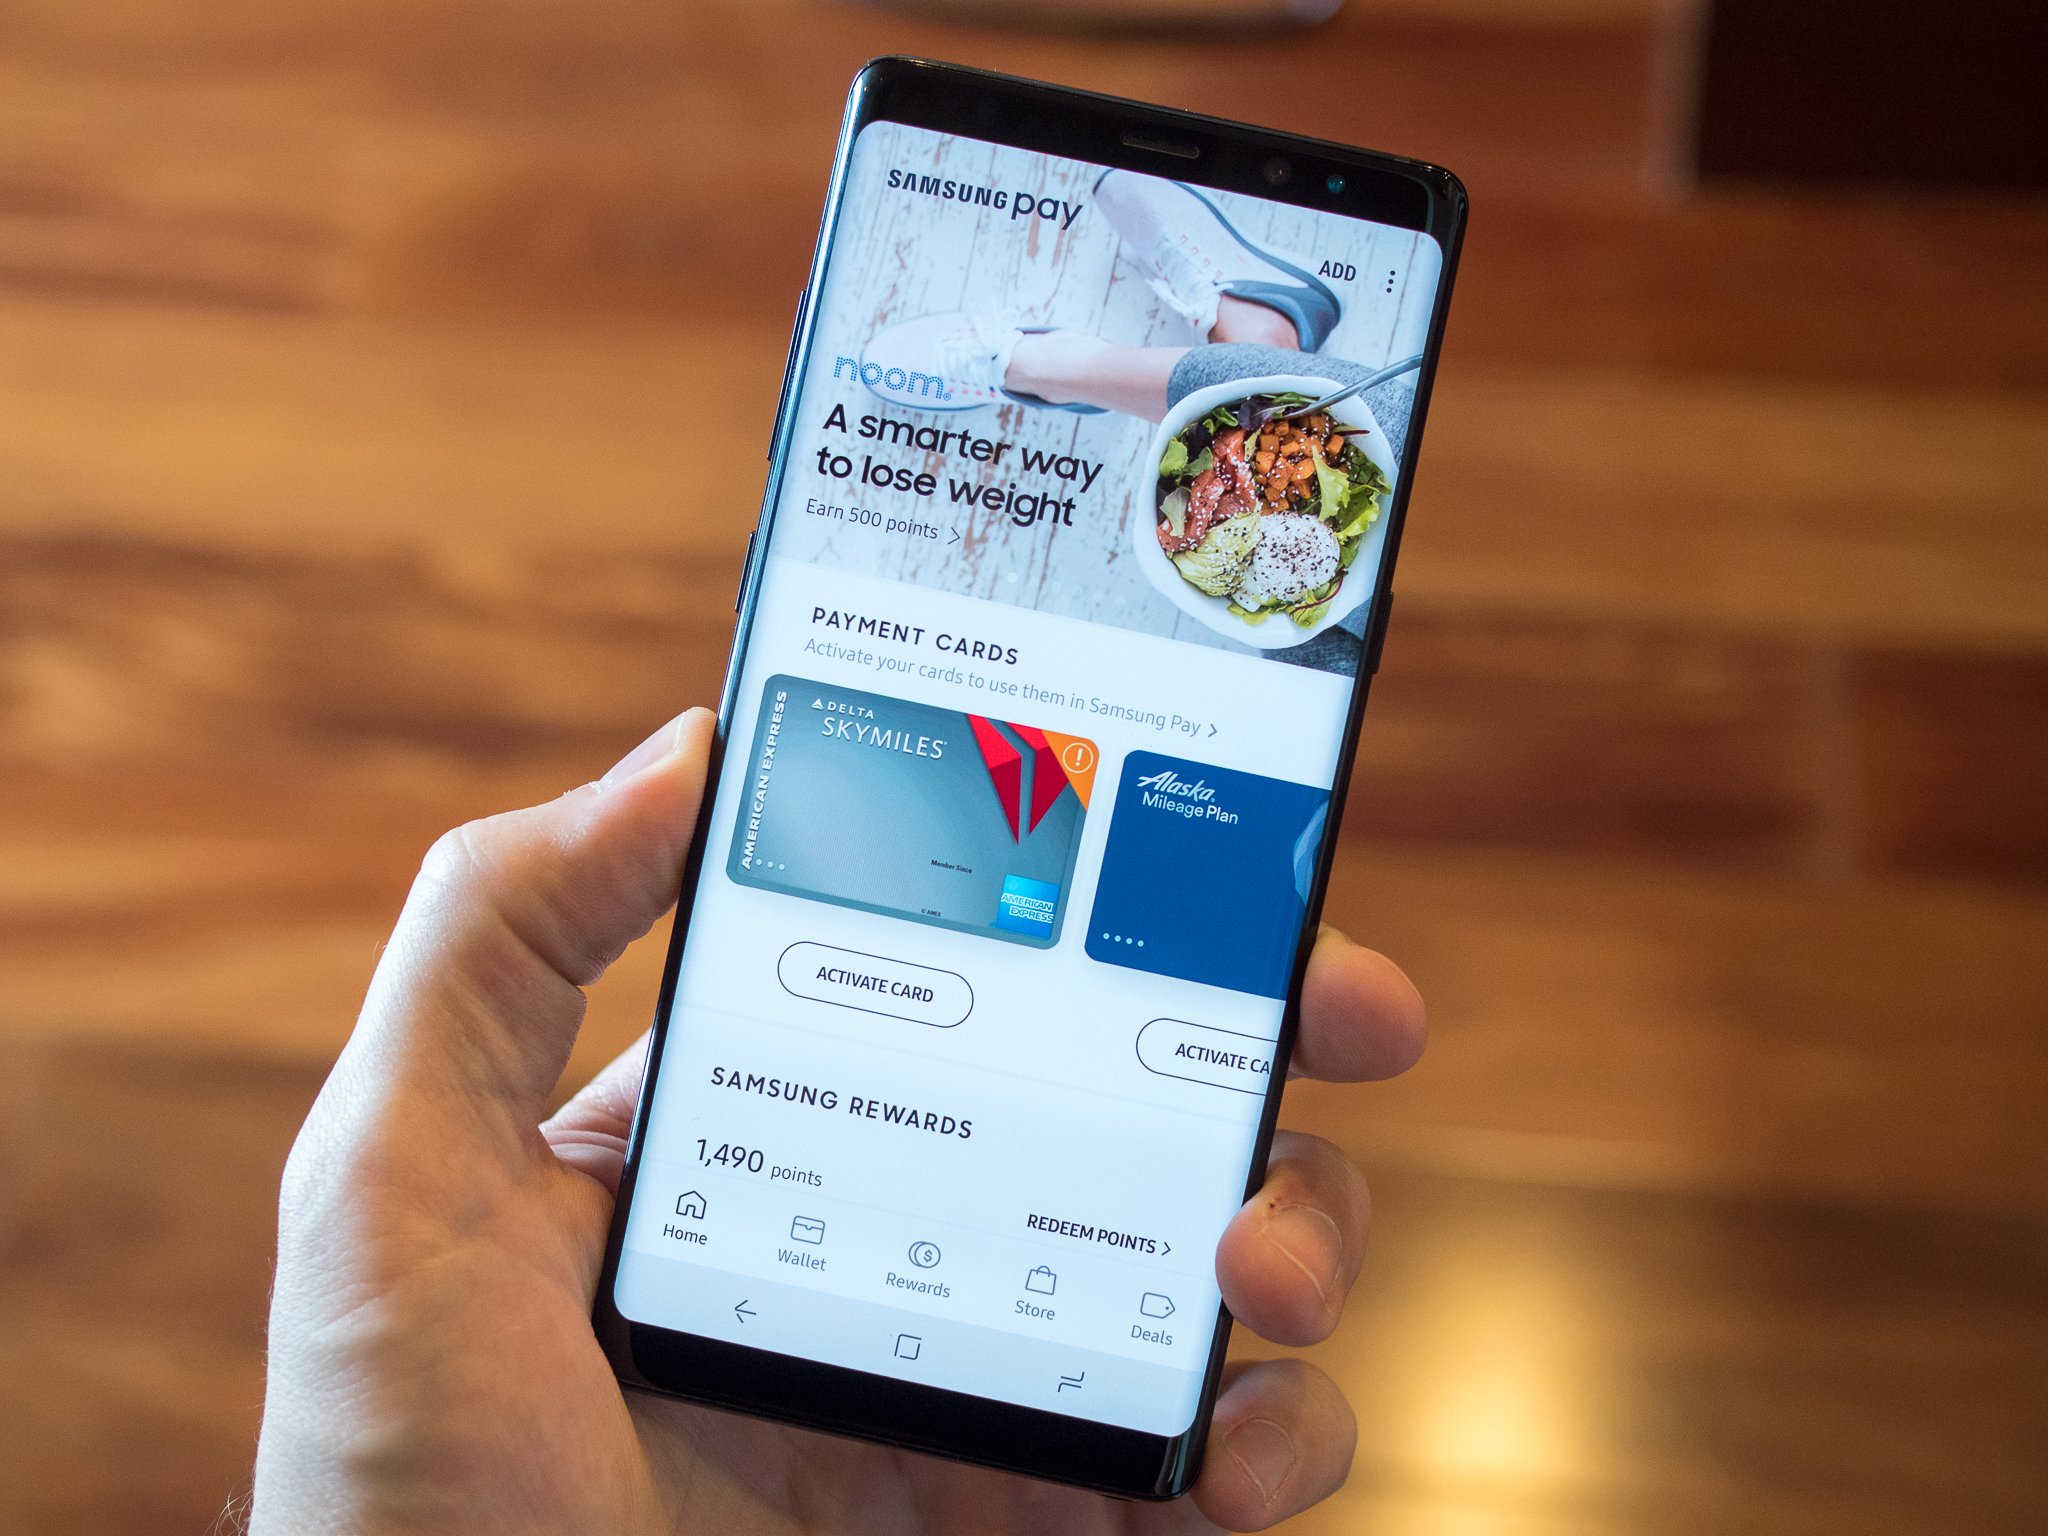 Samsung Pay is launching a debit card and new 'mobile money management platform' with SoFi